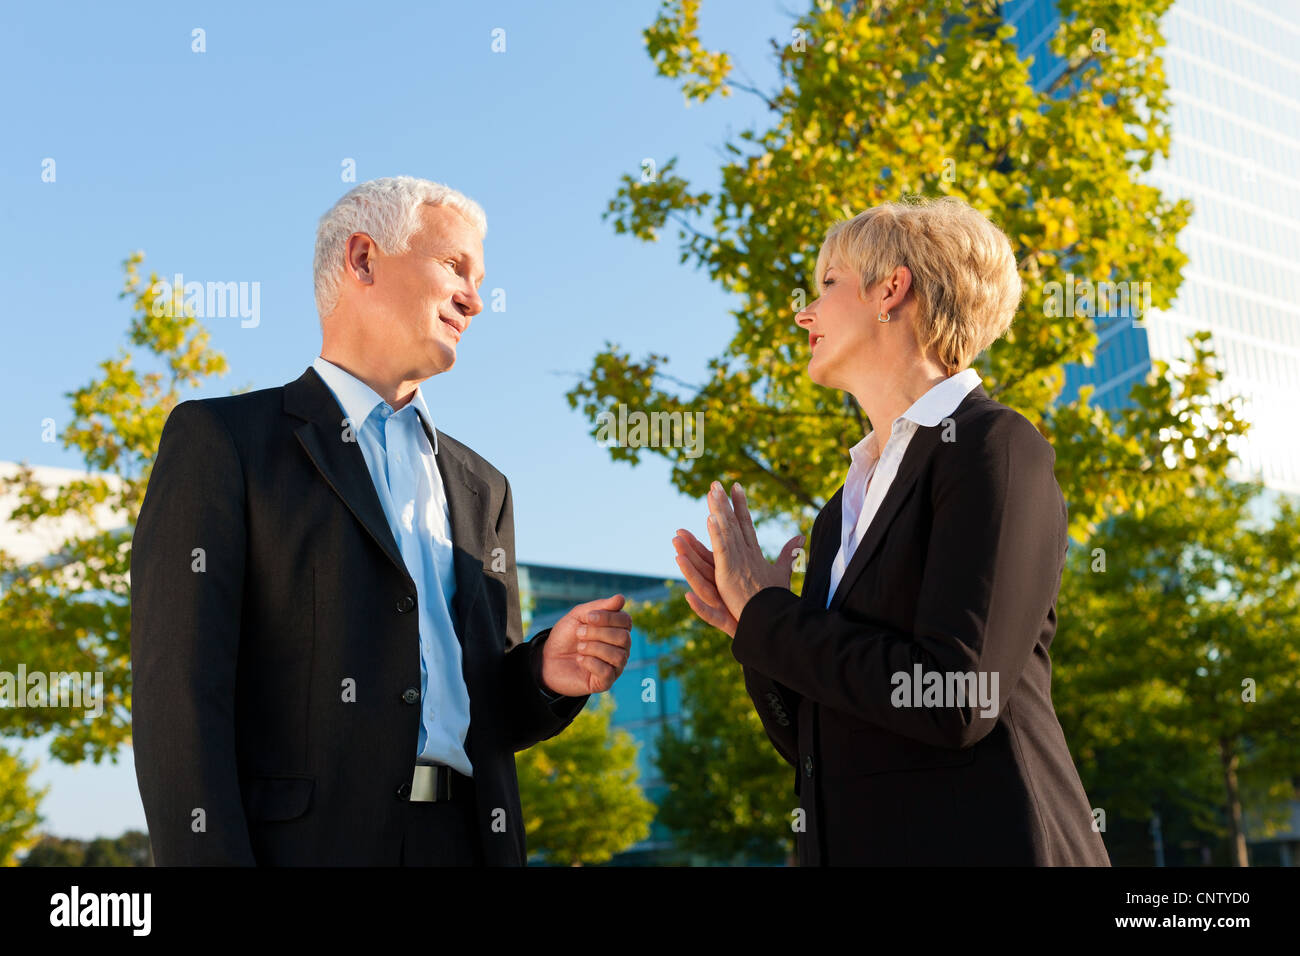 Business people - mature or senior - standing in a park outdoors talking Stock Photo